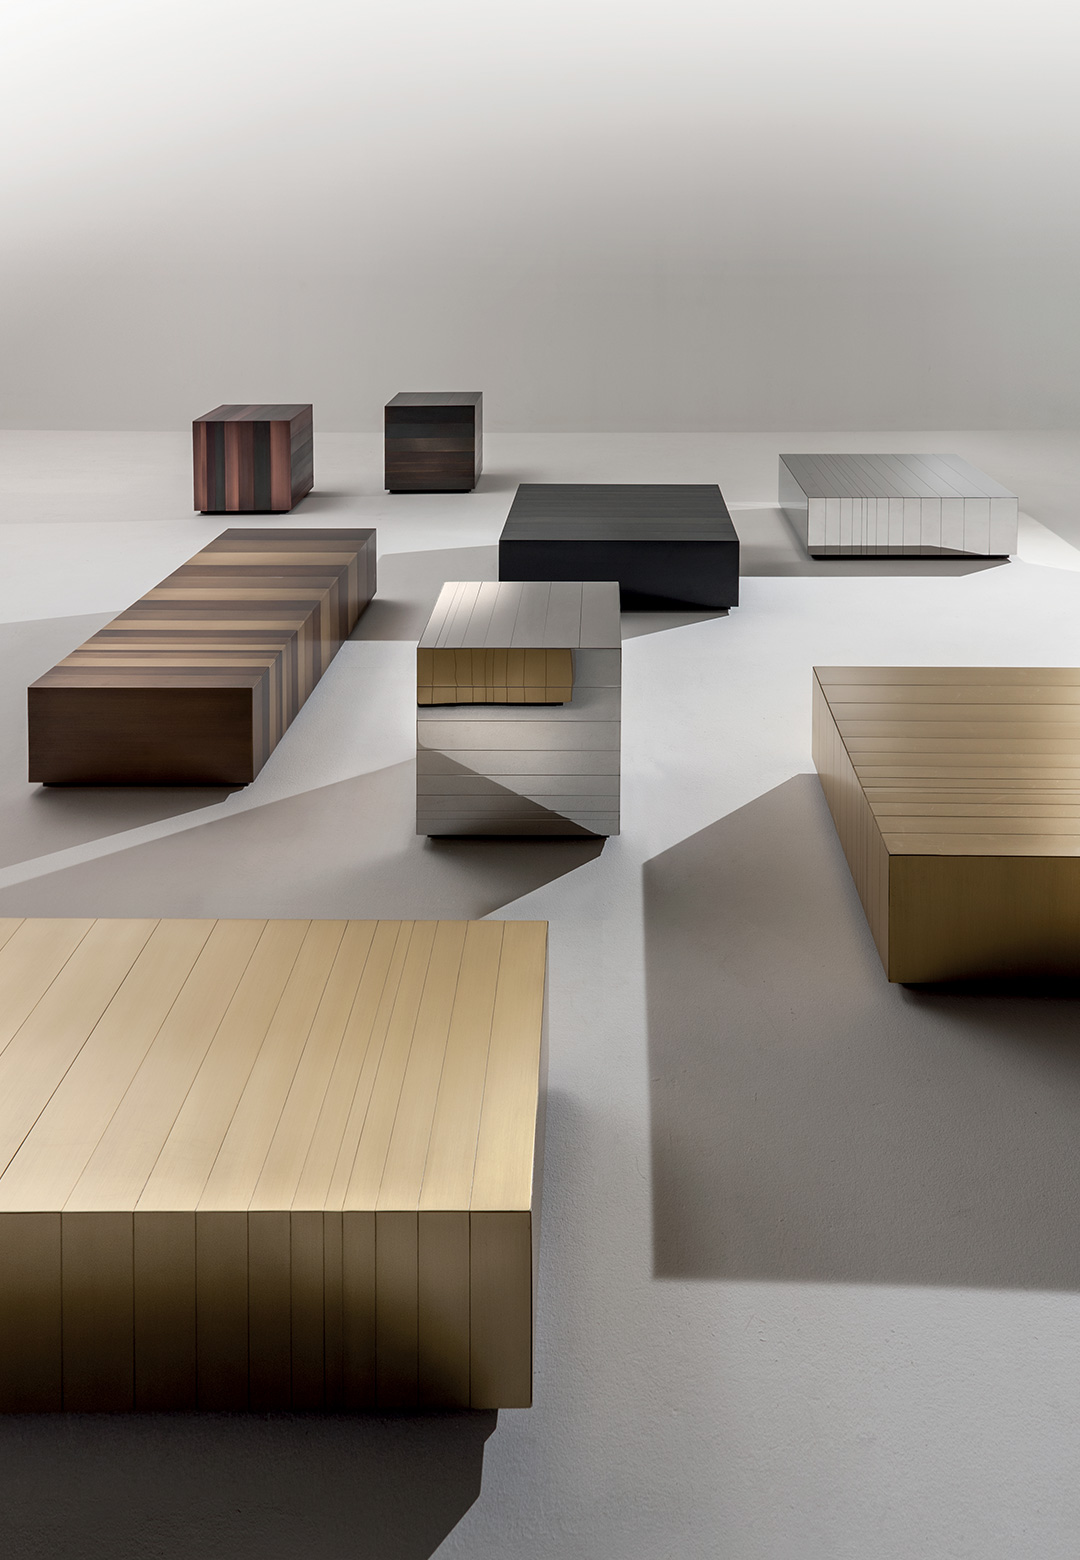 Laurameroni's luxury metal furniture blends skill, creativity and technical expertise